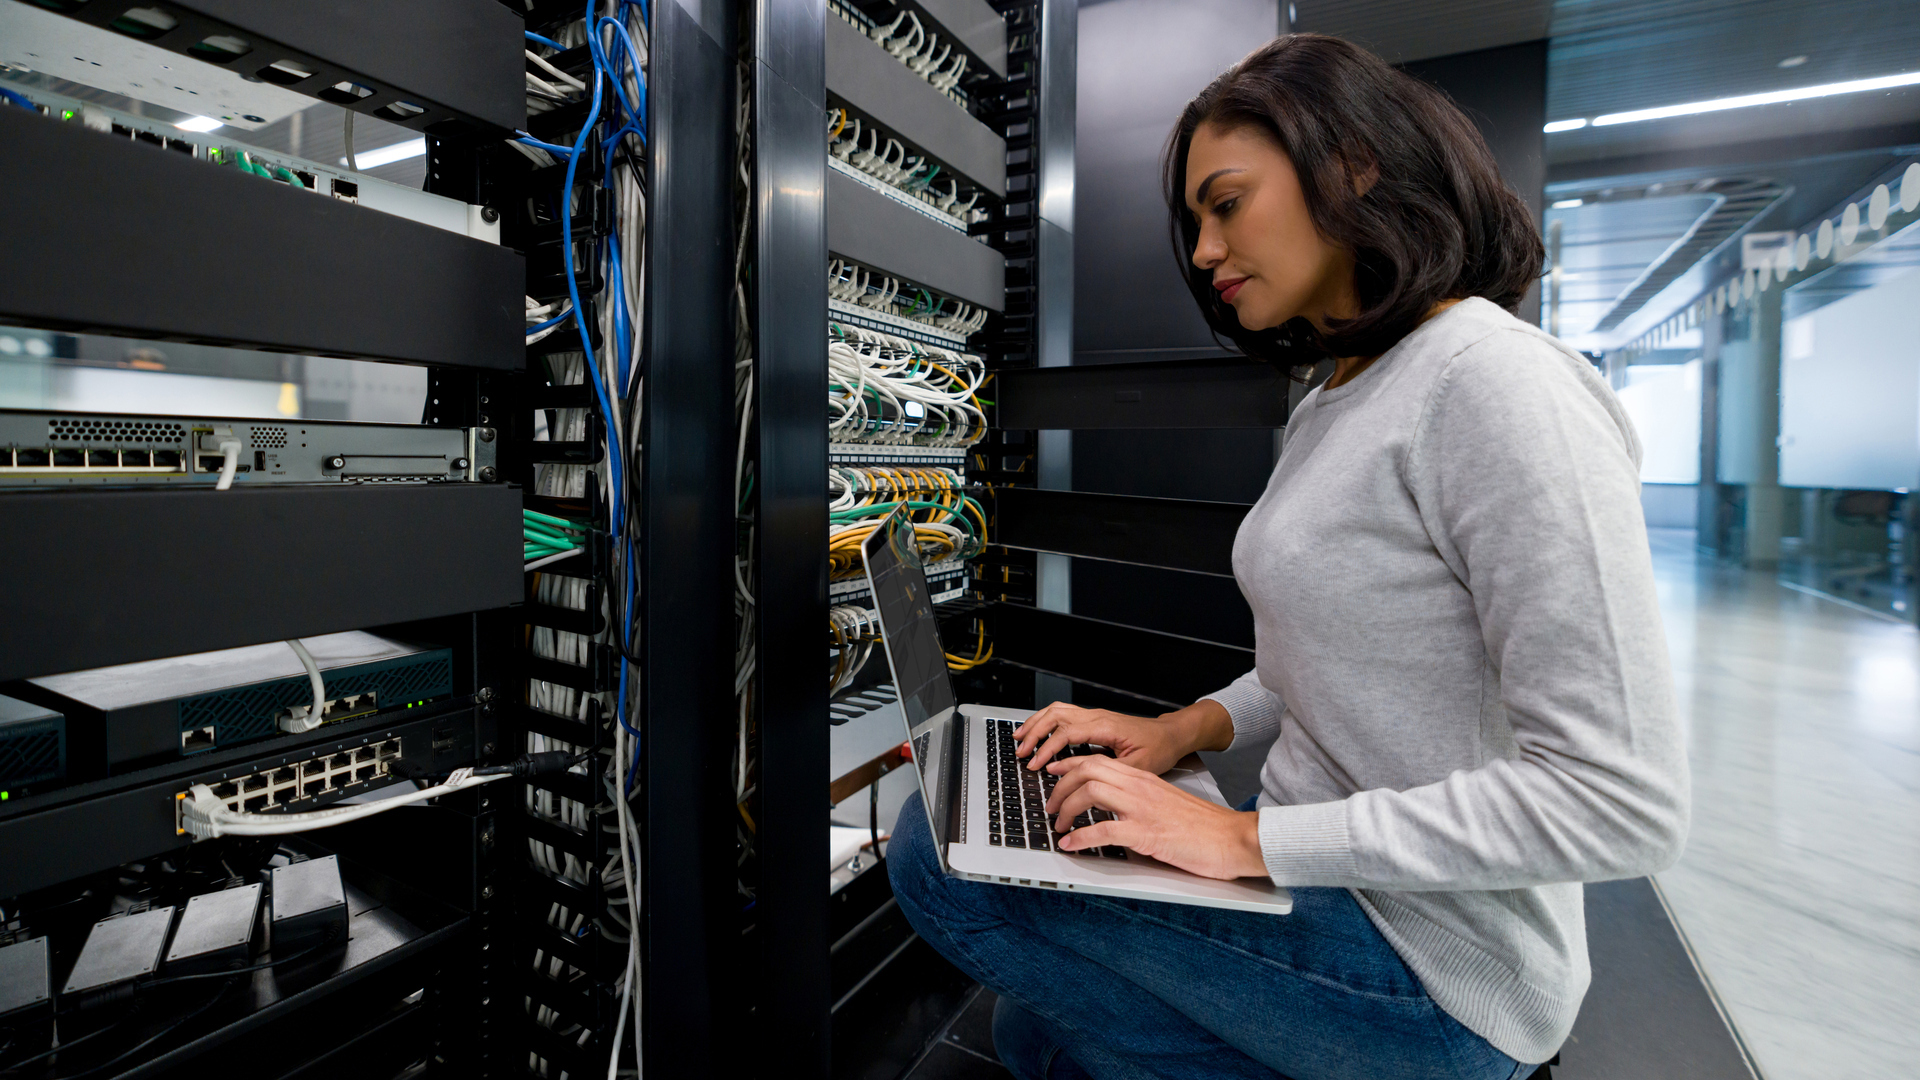 IT support technician fixing a network server at an office